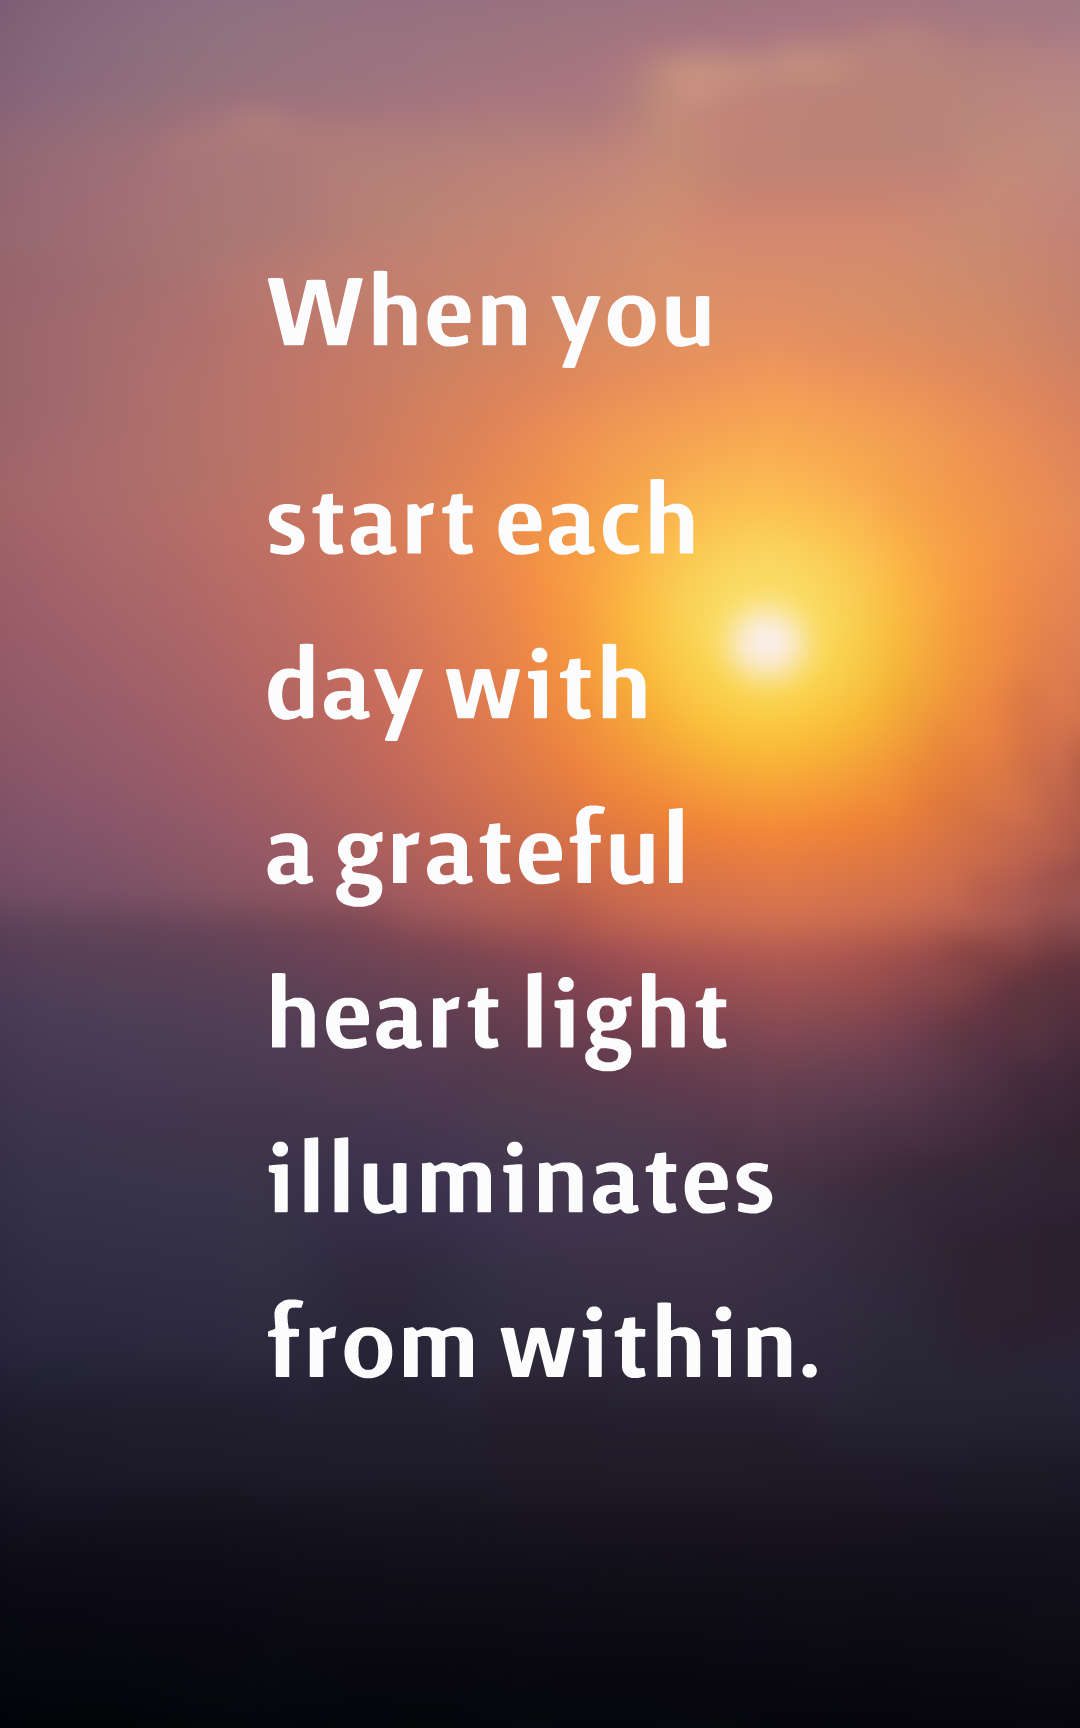 when you start each day with a grateful heart light illuminates from within